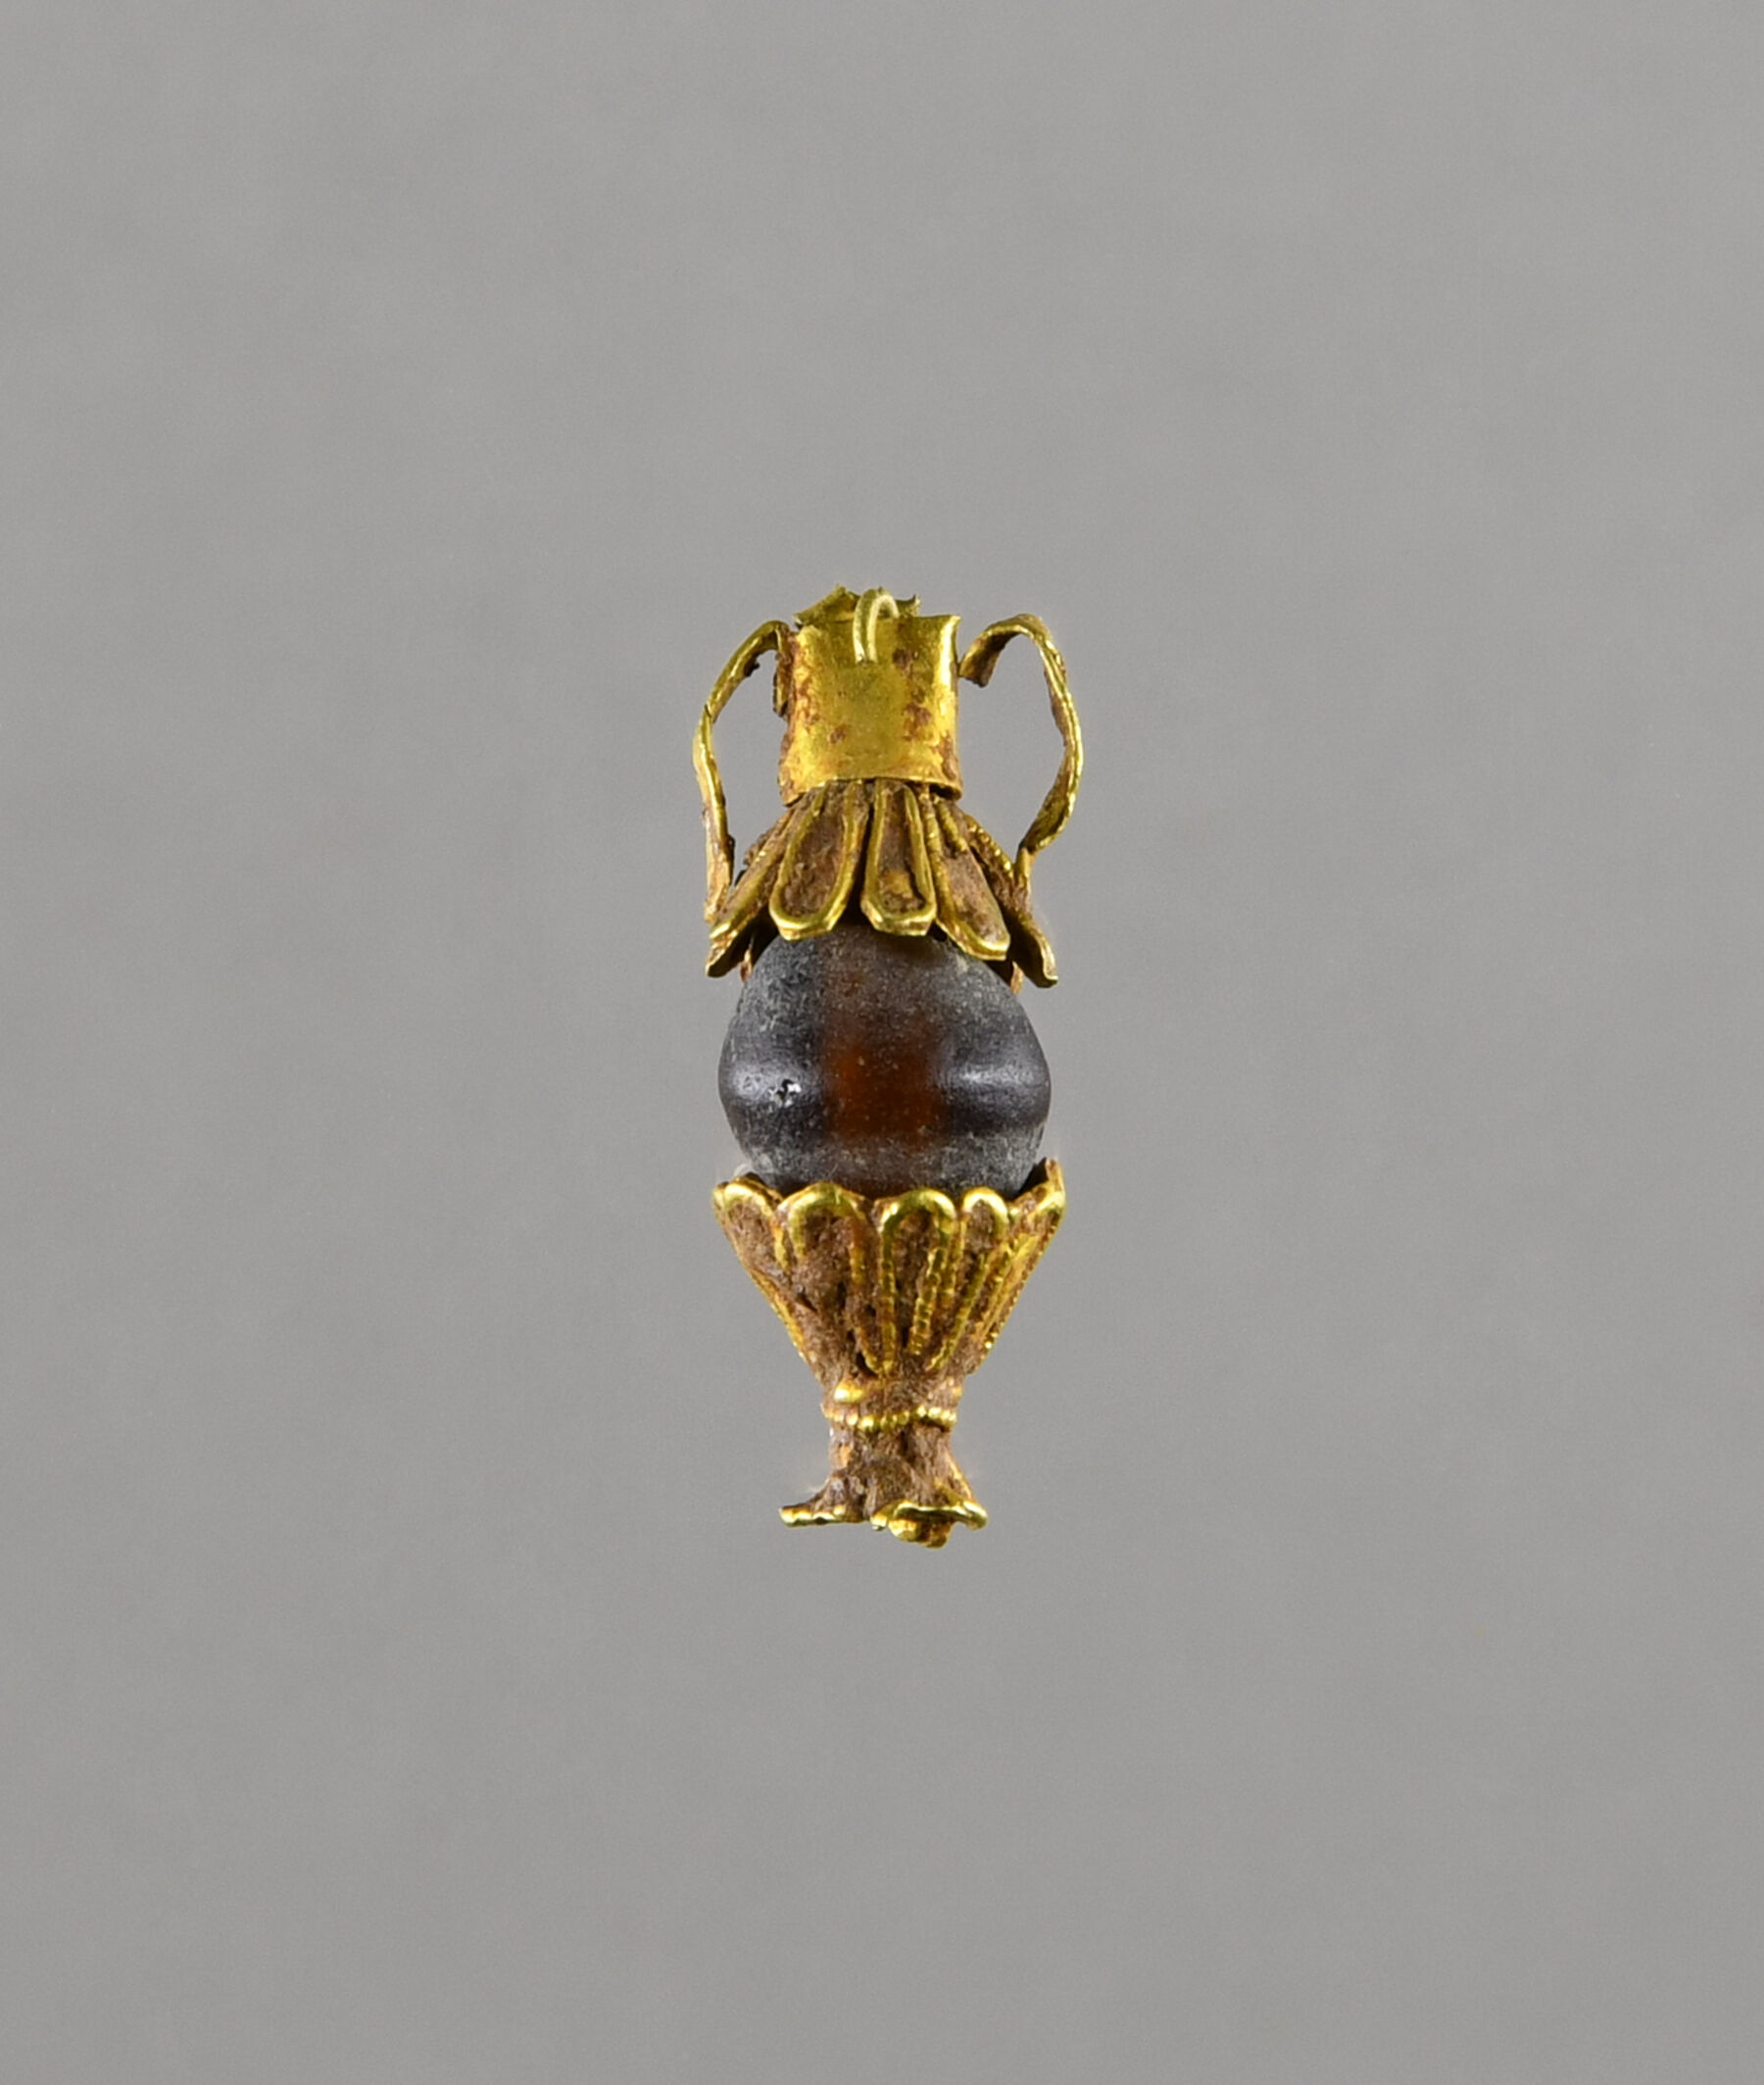 Earring Drop in the Form of an Amphora